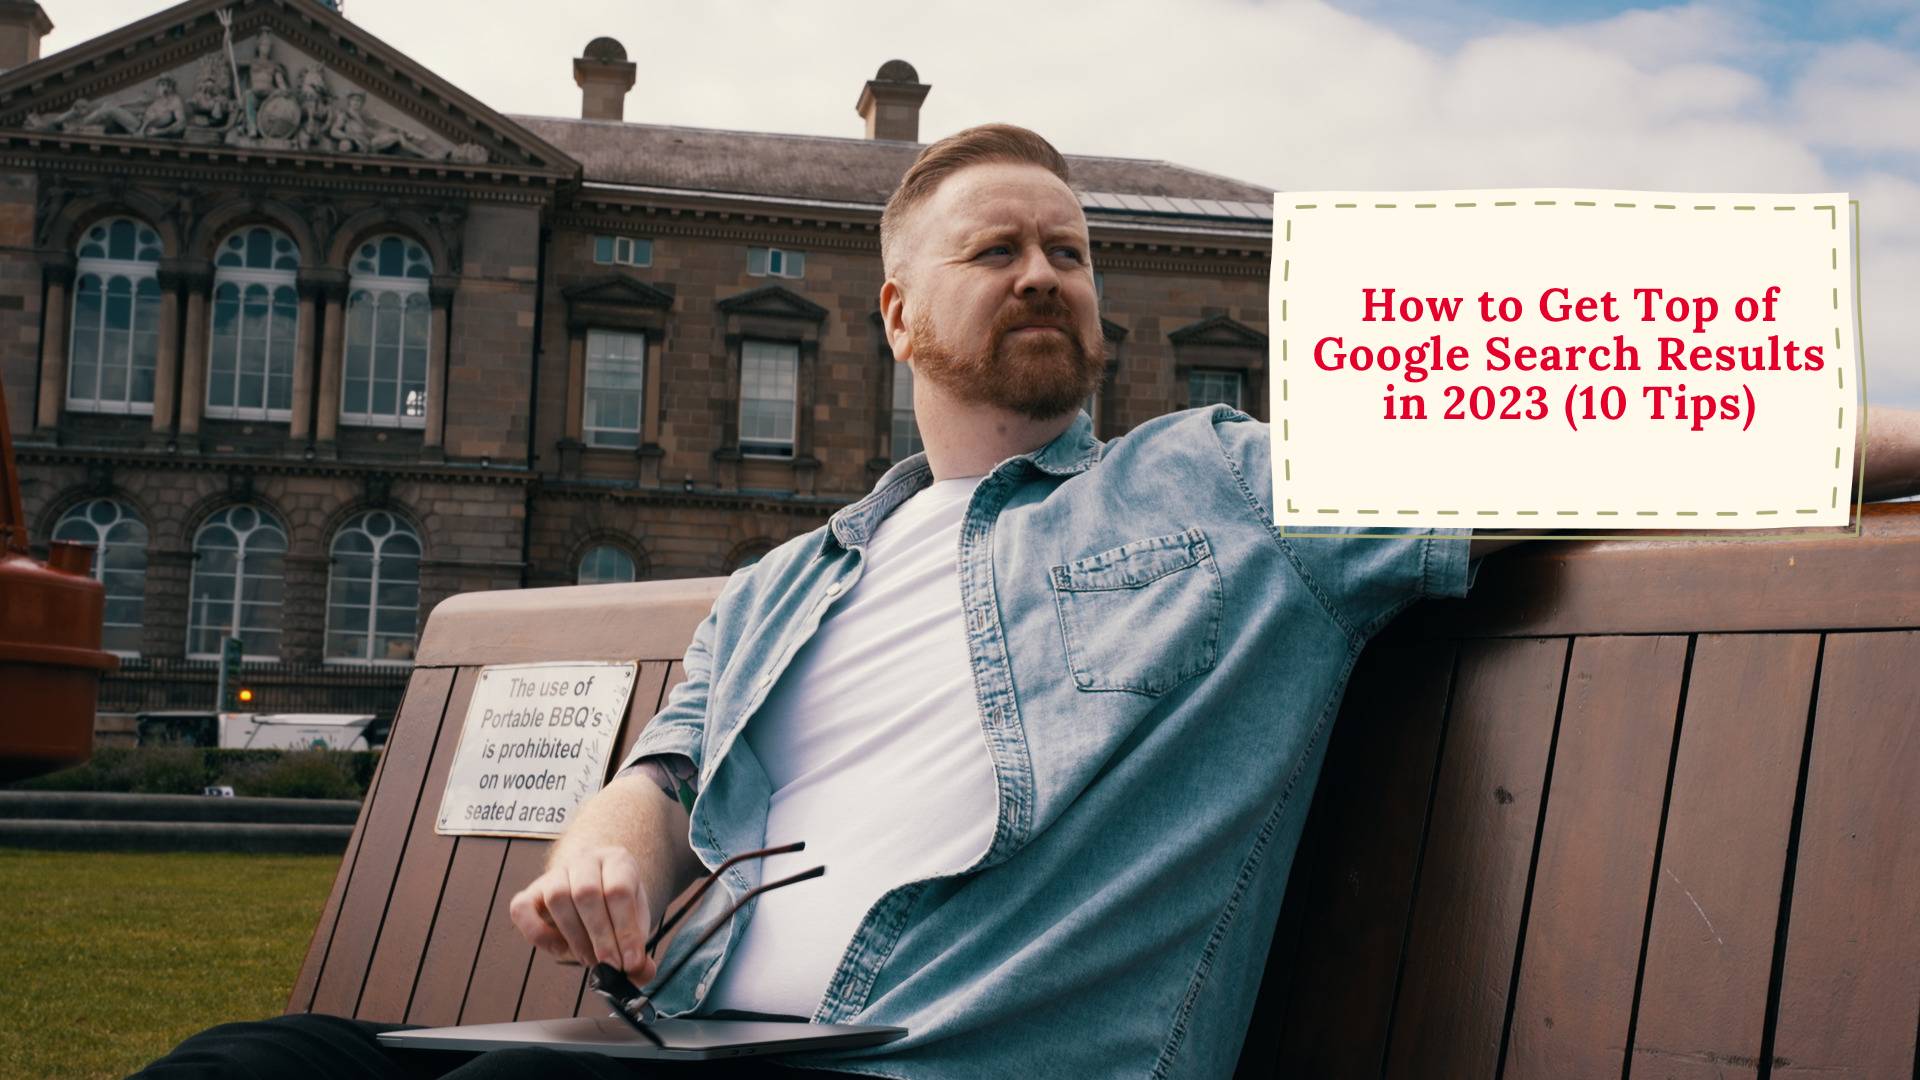 How to Get Top of Google Search Results in 2023 (10 Tips) - belfast blog writer - content writing service belfast